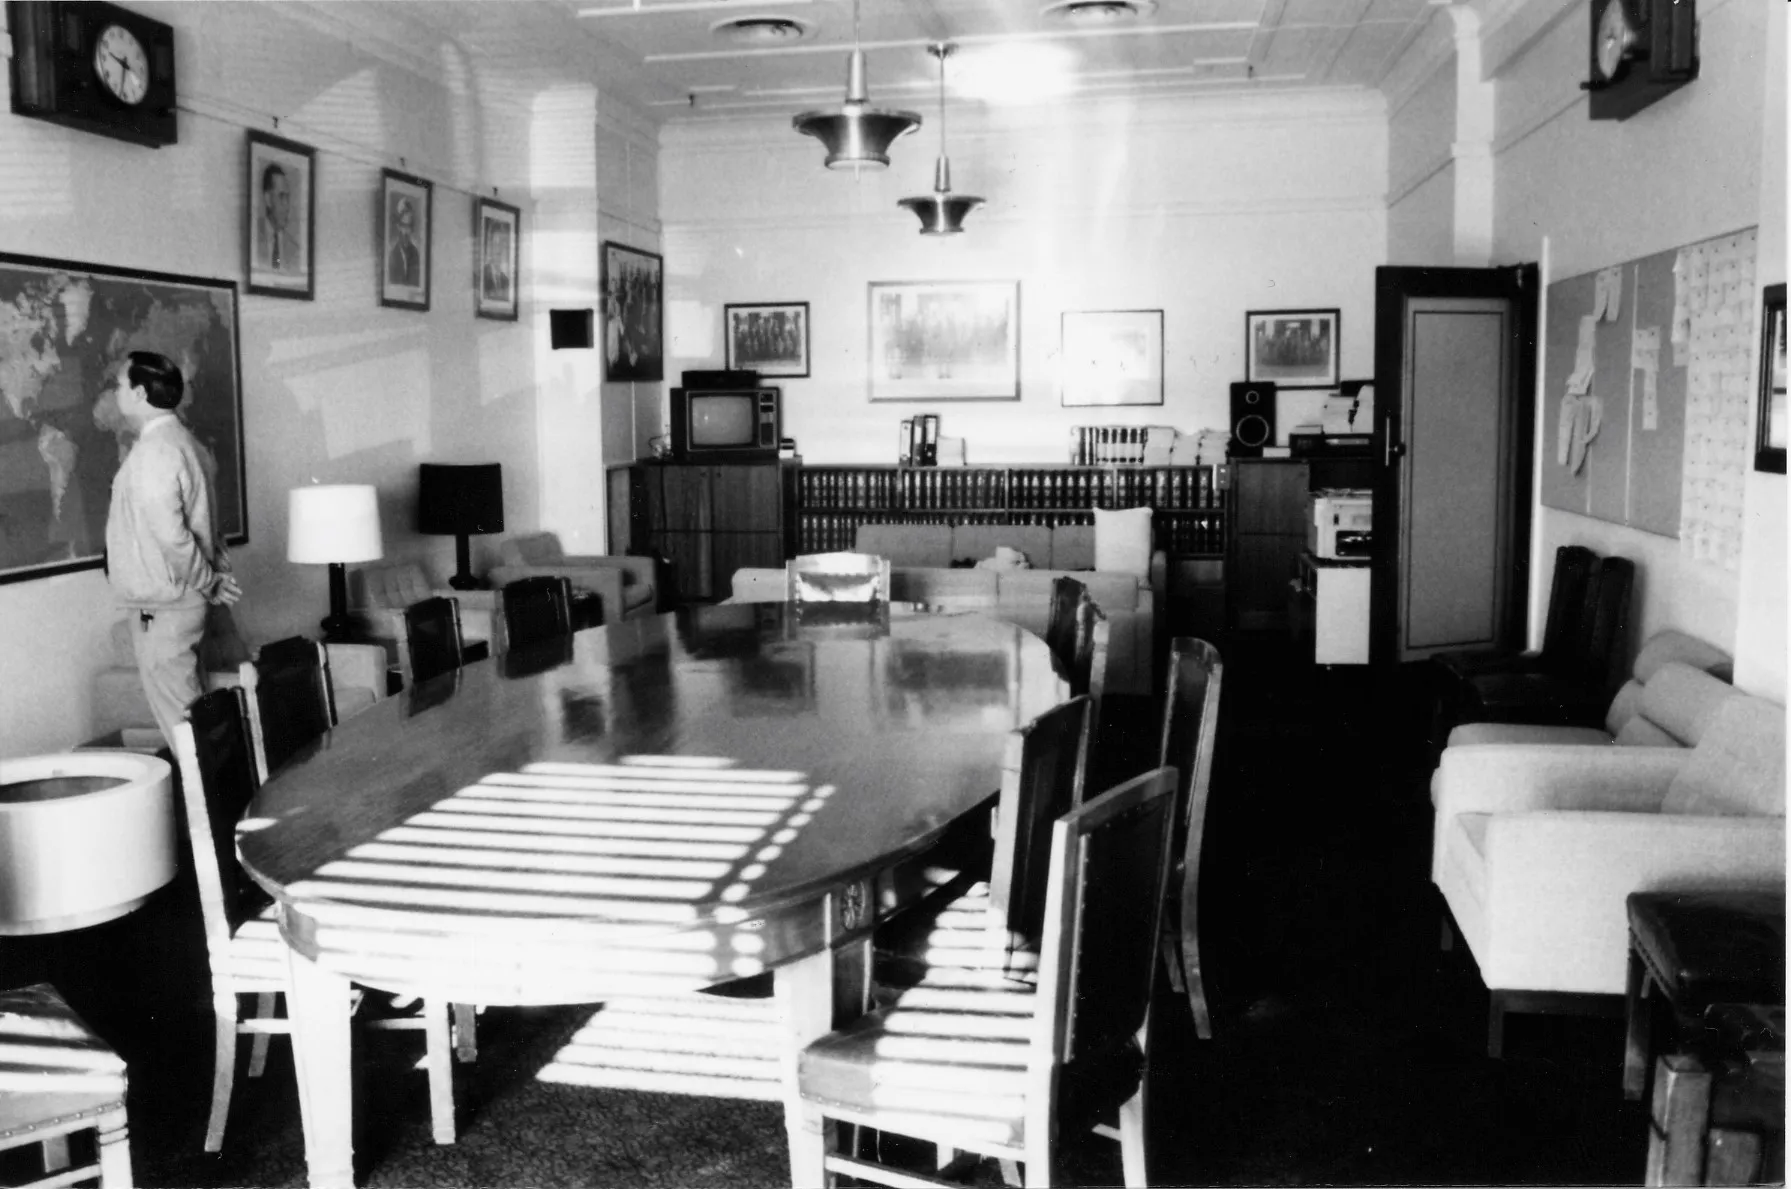 A large oval meeting table and chairs dominate the centre of the room. Easy chairs with side tables and lamps are arrayed along the sides and two sofas are arranged in a seating area towards the back of the room. A sideboard with books, a television and sound system stretches along the back wall. There is a framed map on one wall and a notice board on the opposite. Portraits of leaders and formal and informal photographs of the party crowd the walls